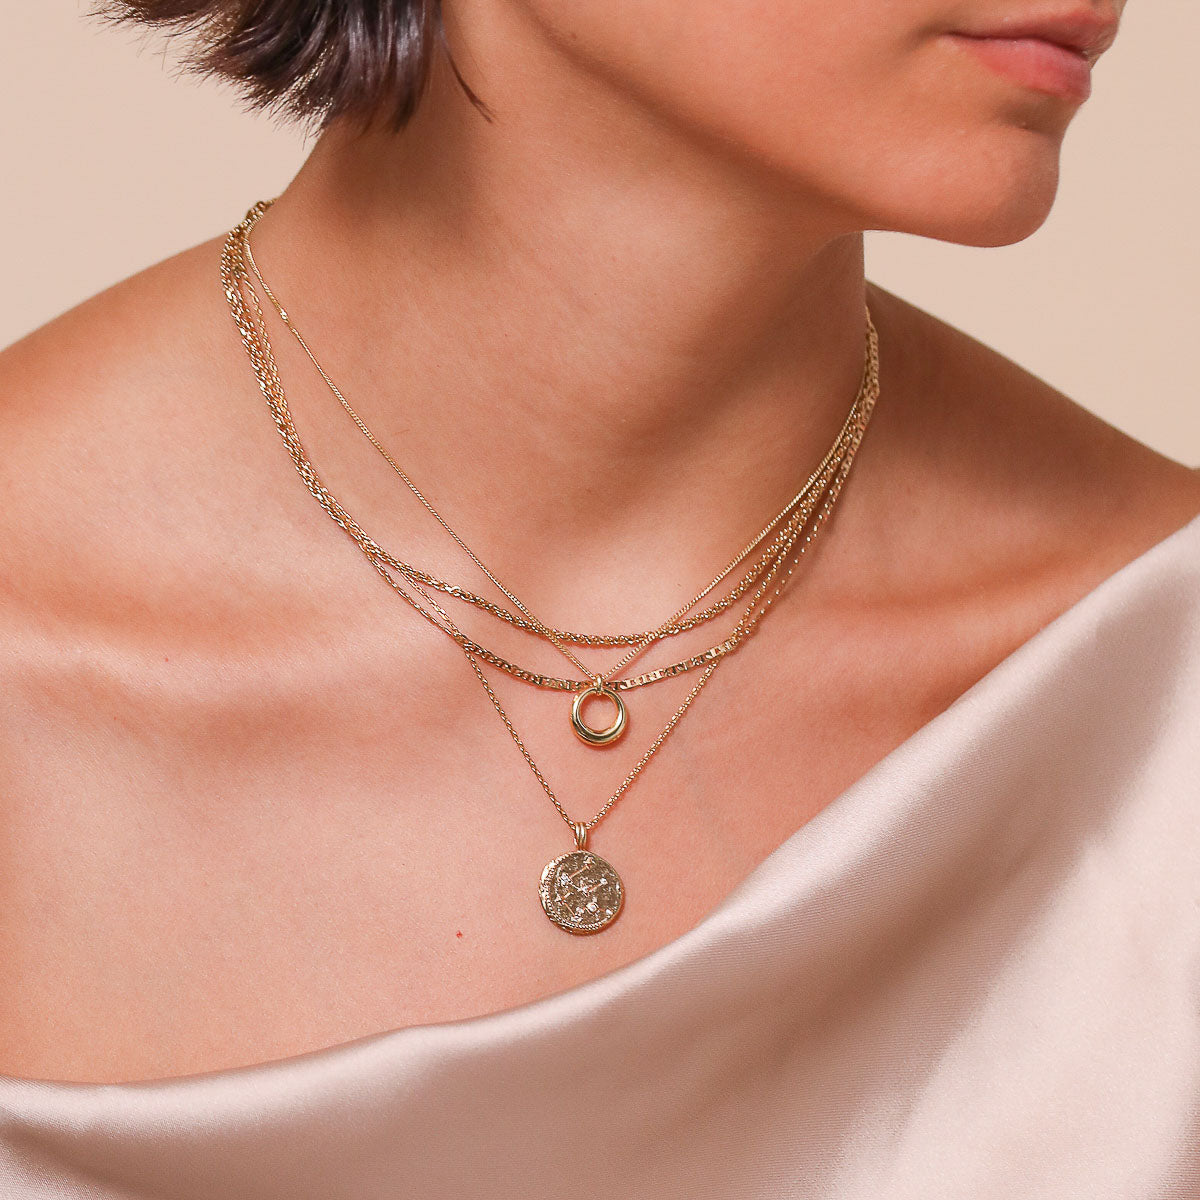 Aquarius Zodiac Pendant Necklace in Gold worn layered with necklaces